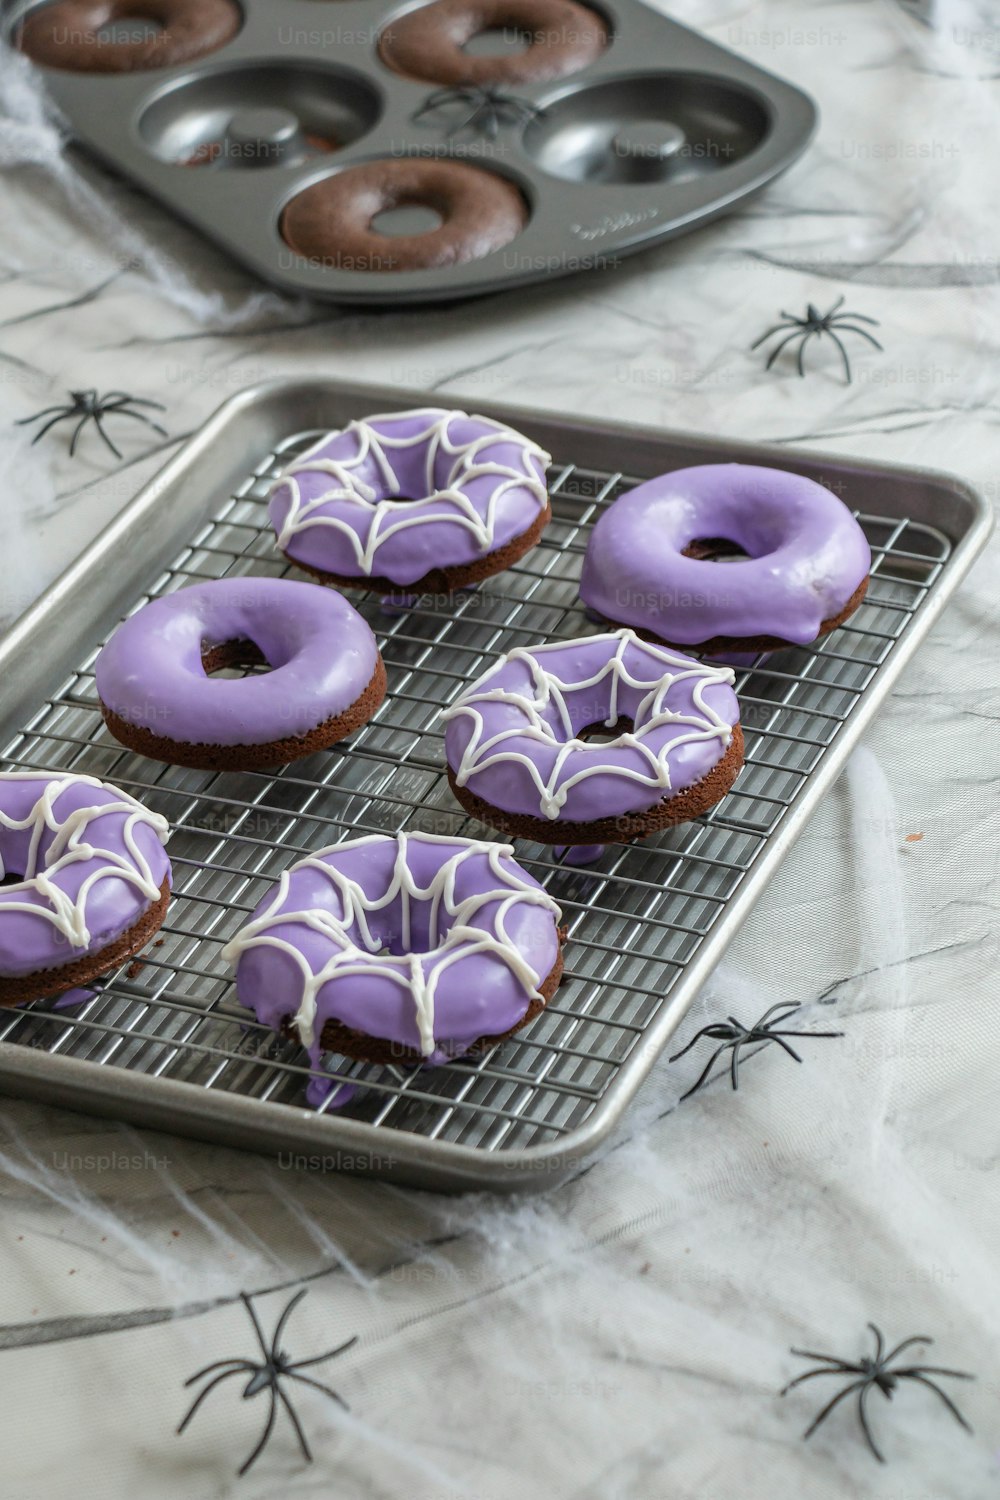 a tray of purple frosted donuts on a table